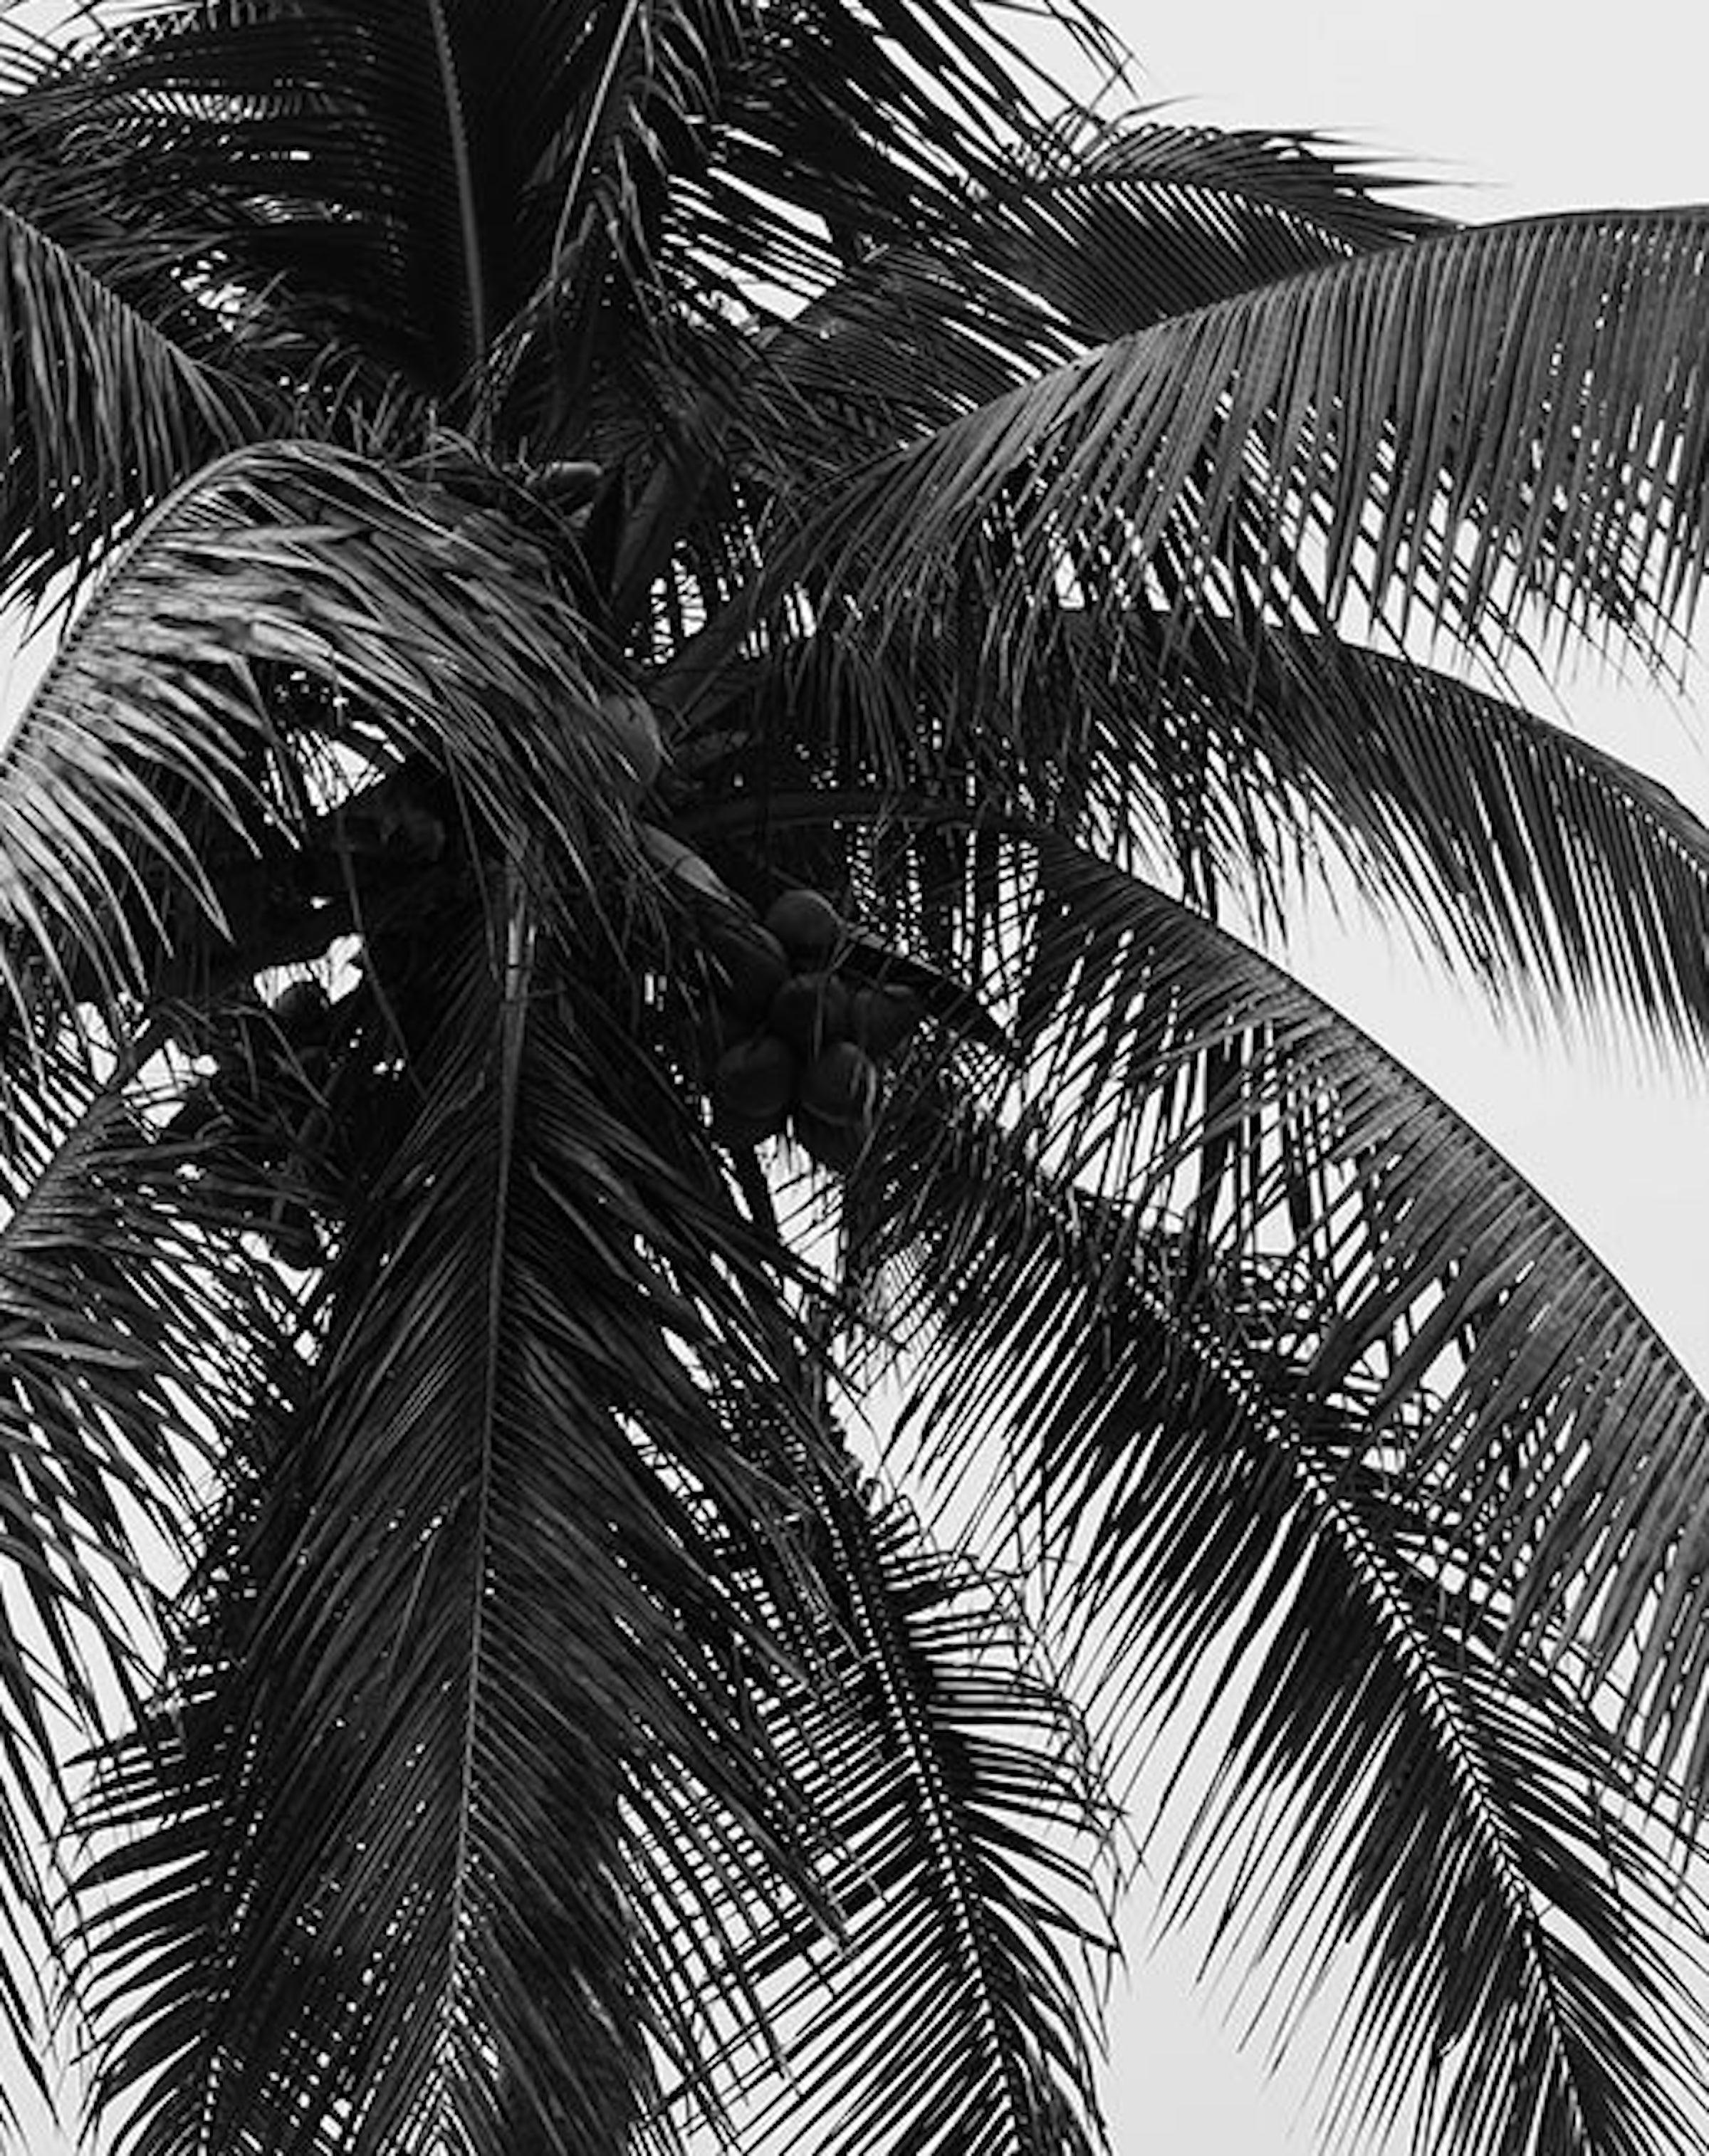 Archival Pigment print
Medium Ed of 10

Palm & Trees: For this series, the artist explores short poems, the expansion of the palms, textures, and ease of the male figure surrounded by the sea and skies. He added that he is always sketching palm